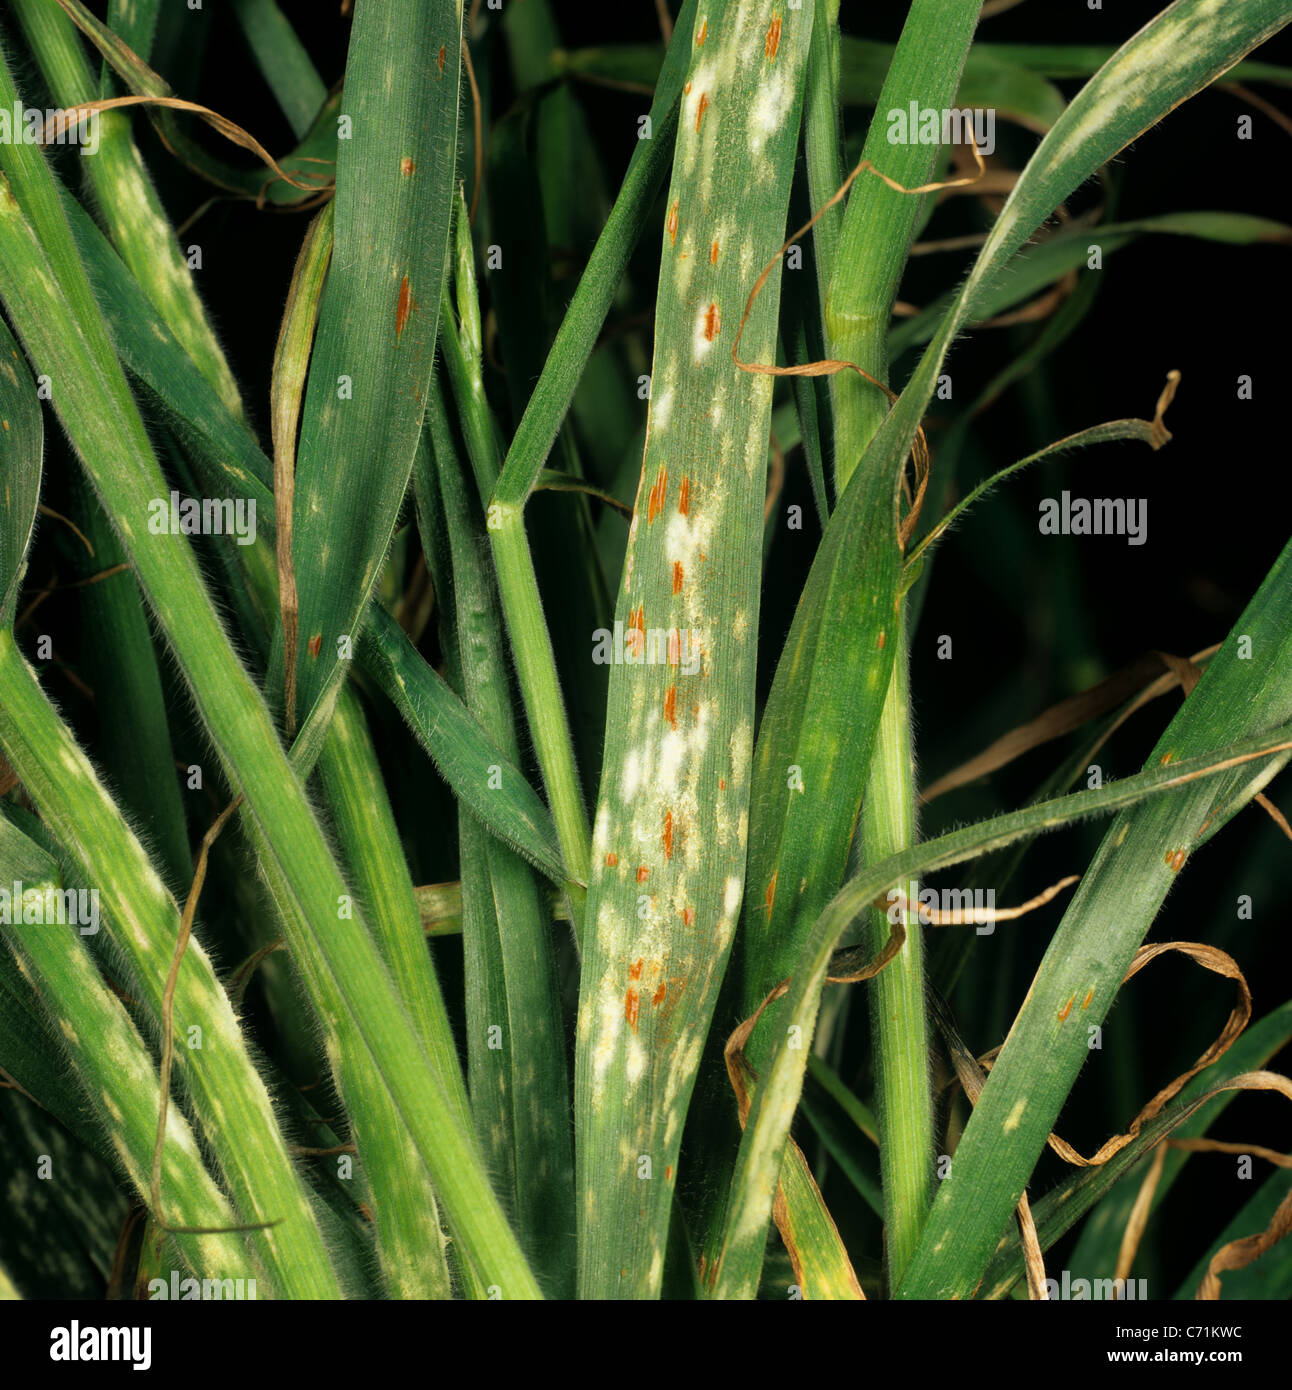 Powdery mildew (Erysiphe graminis) & brown rust (Puccinia triticina) on brome grass leaves Stock Photo